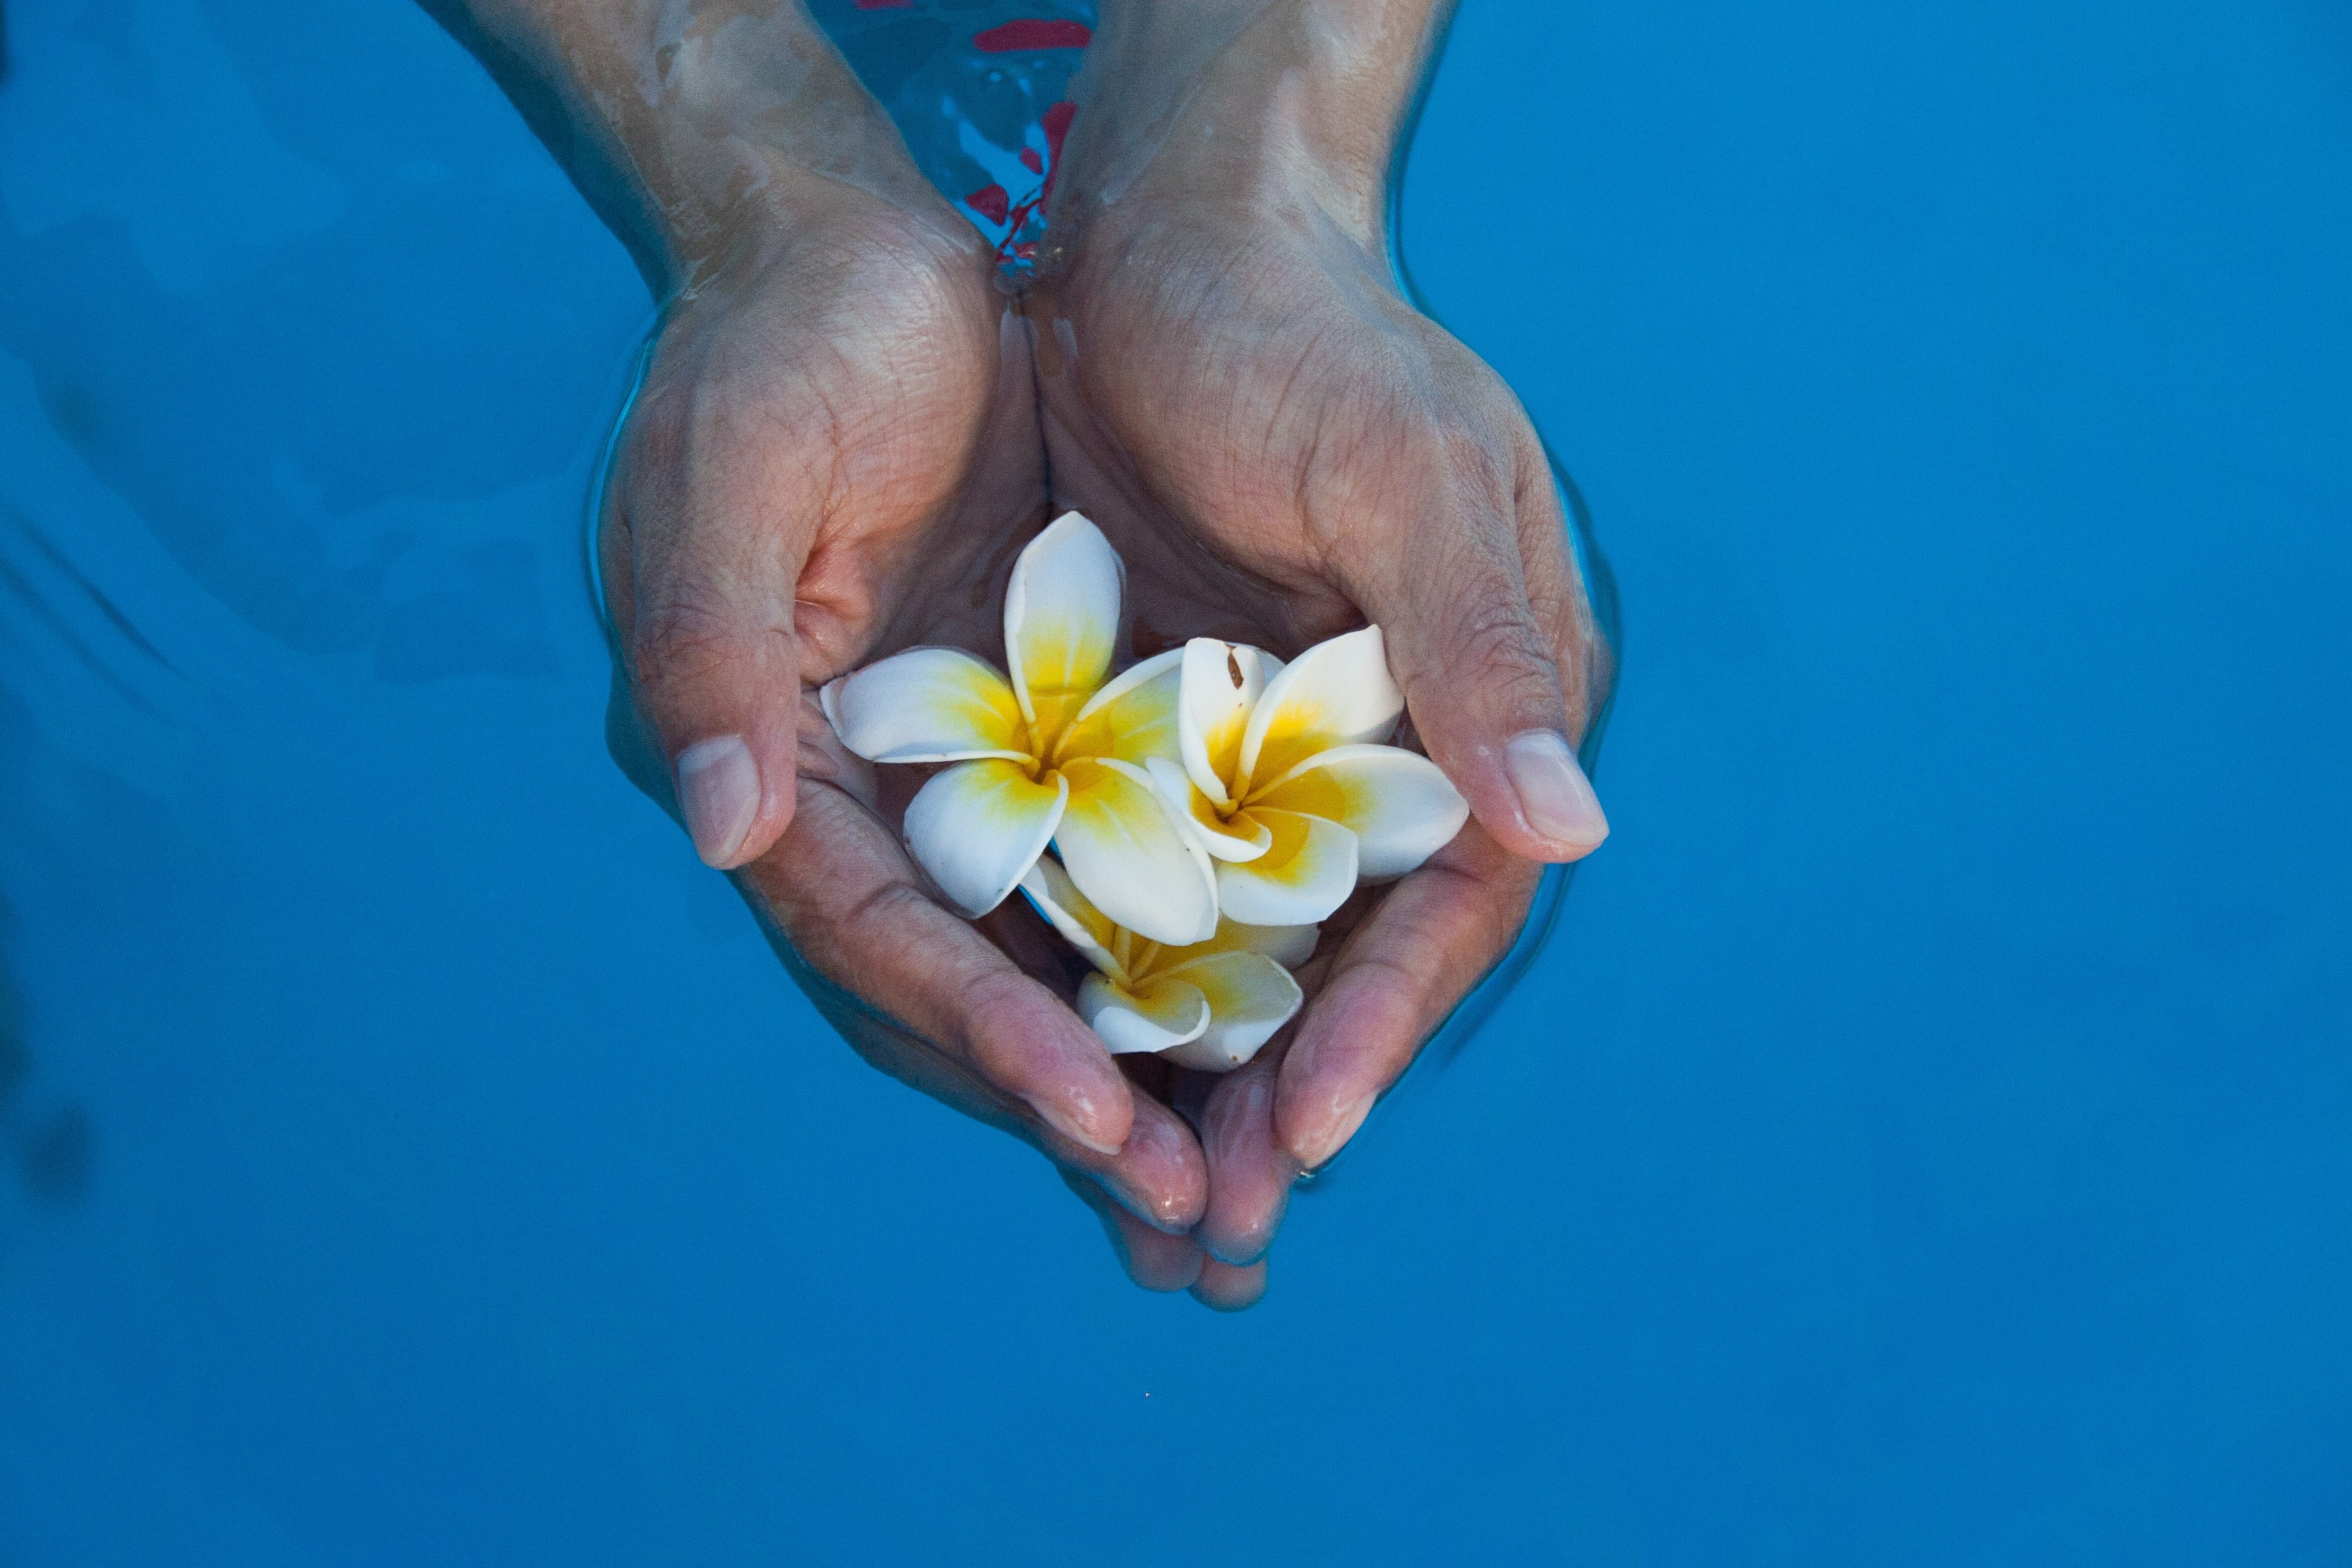 Water, Flowers, Collection Of Hand, flower, human body part